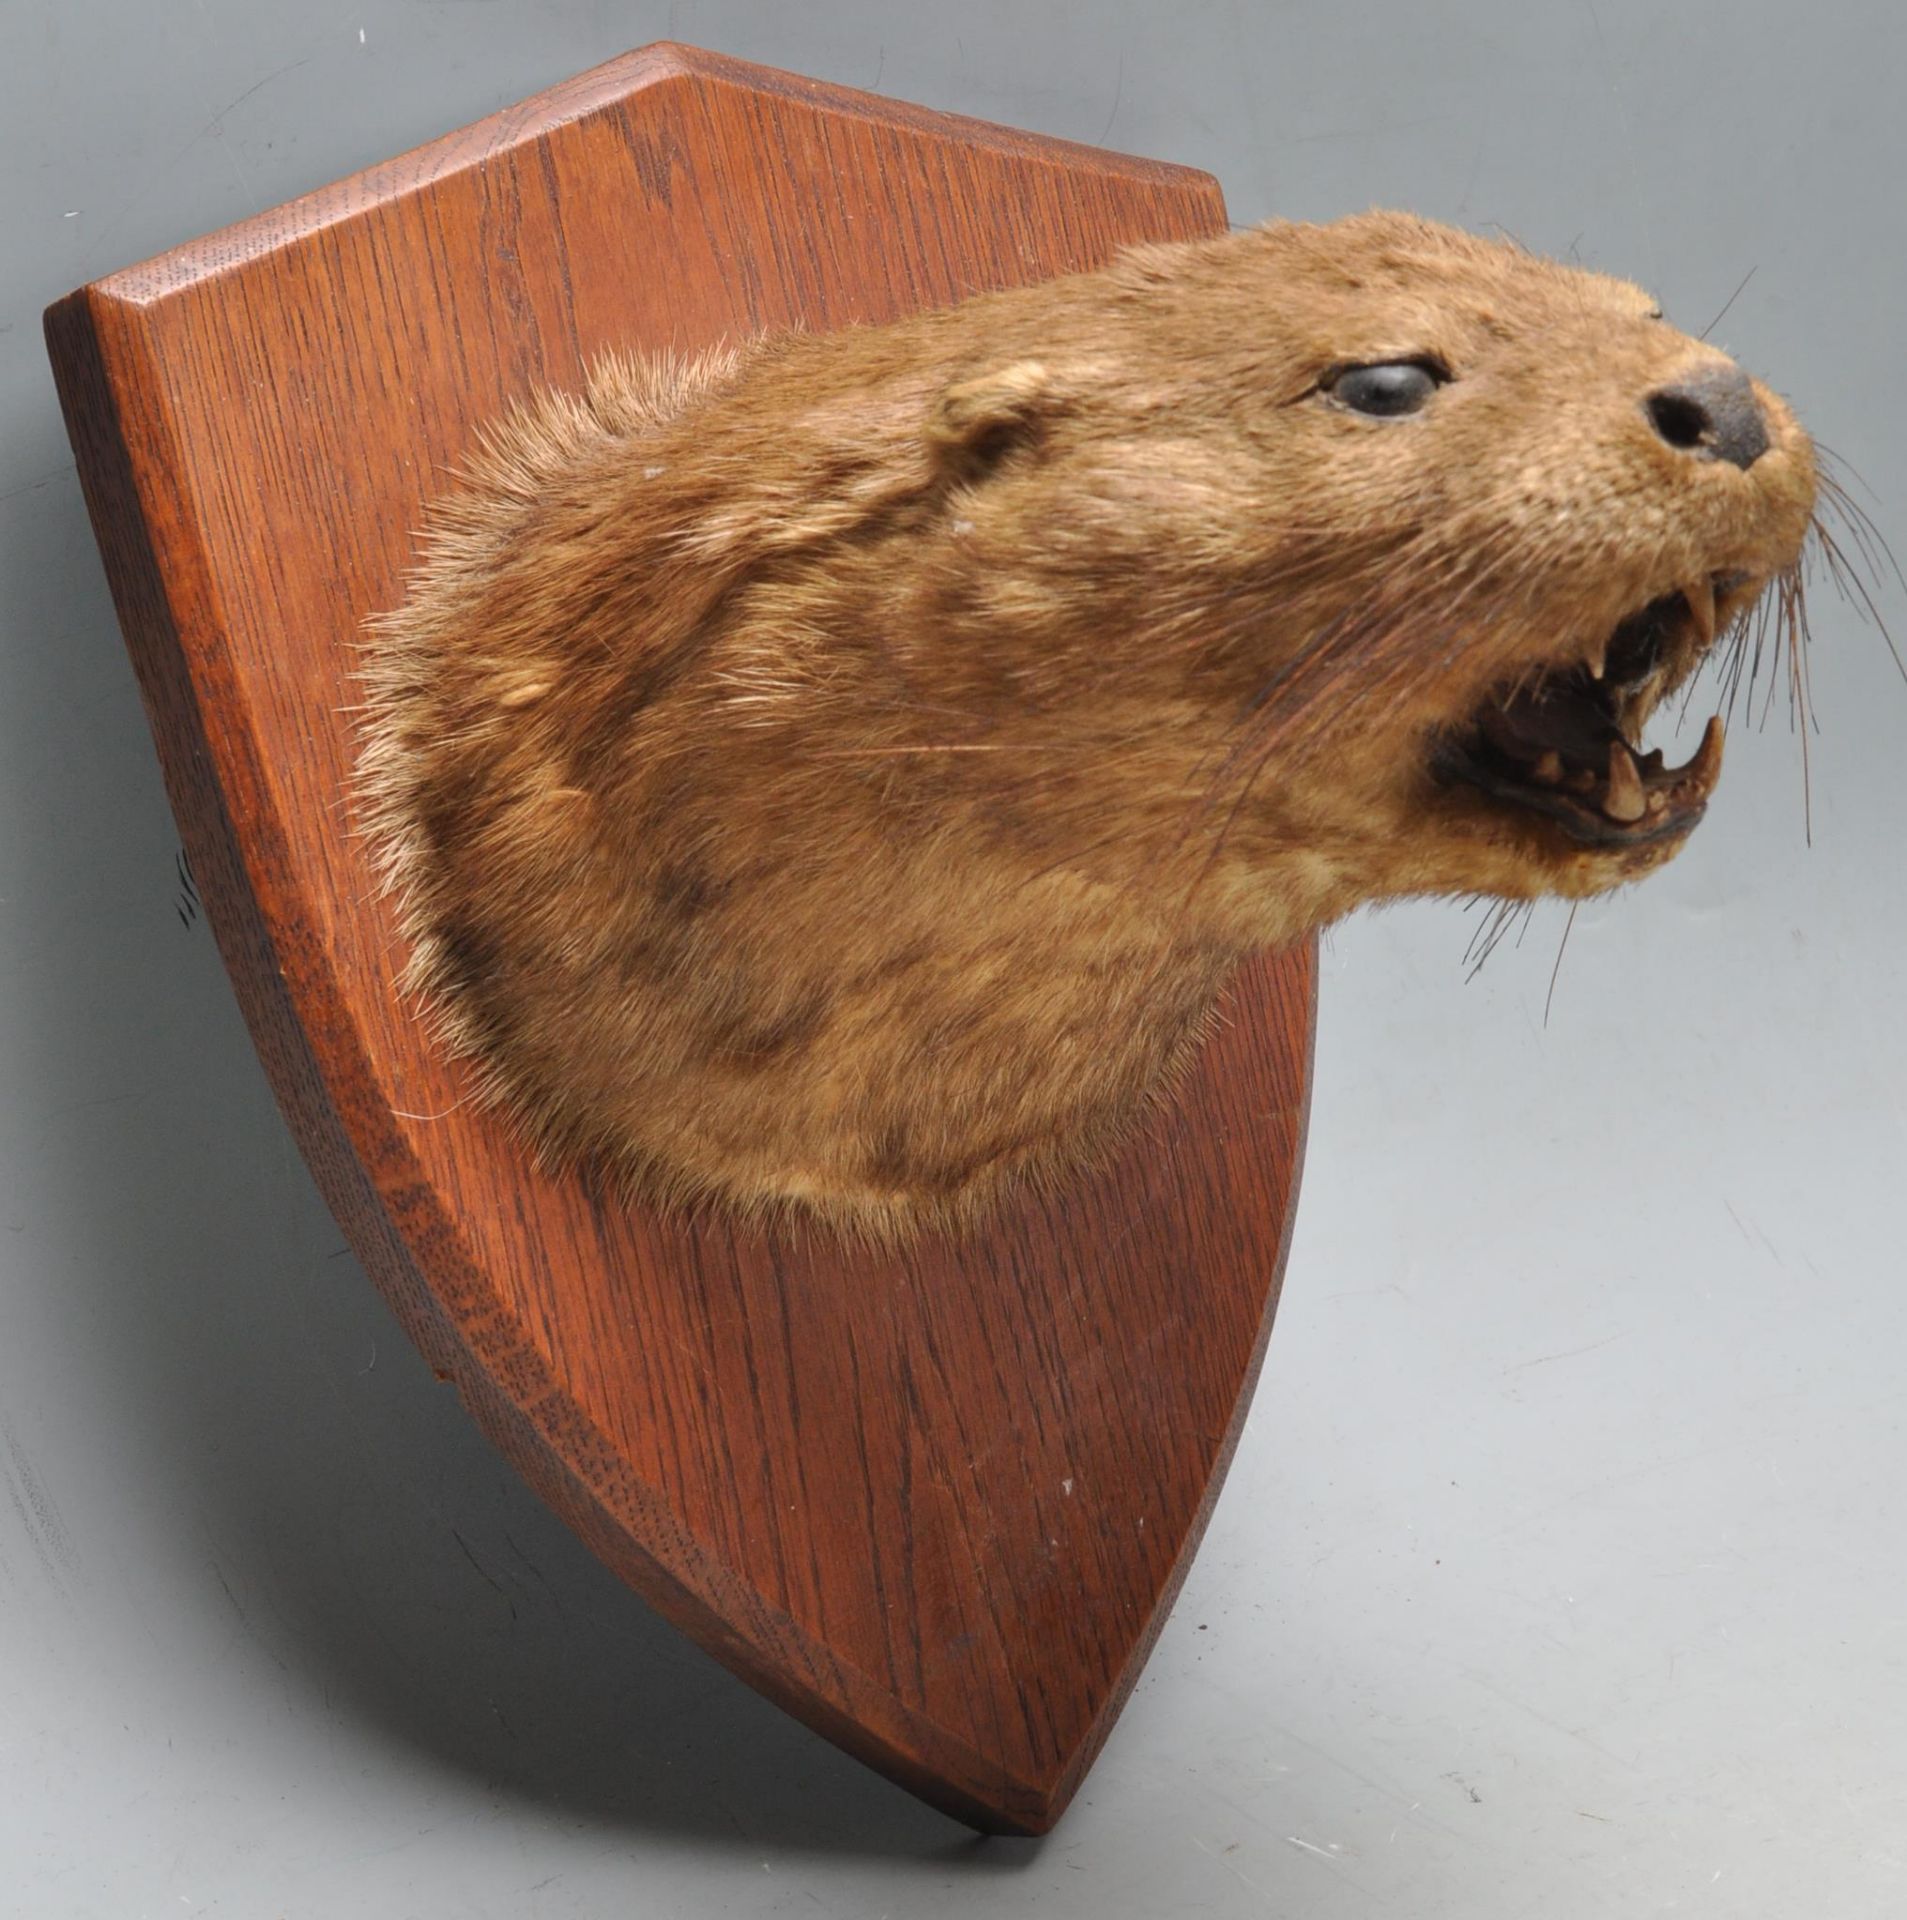 OF TAXIDERMY INTEREST - LATE 20TH CENTURY TAXIDERMY OTTERS HEAD - Image 2 of 6